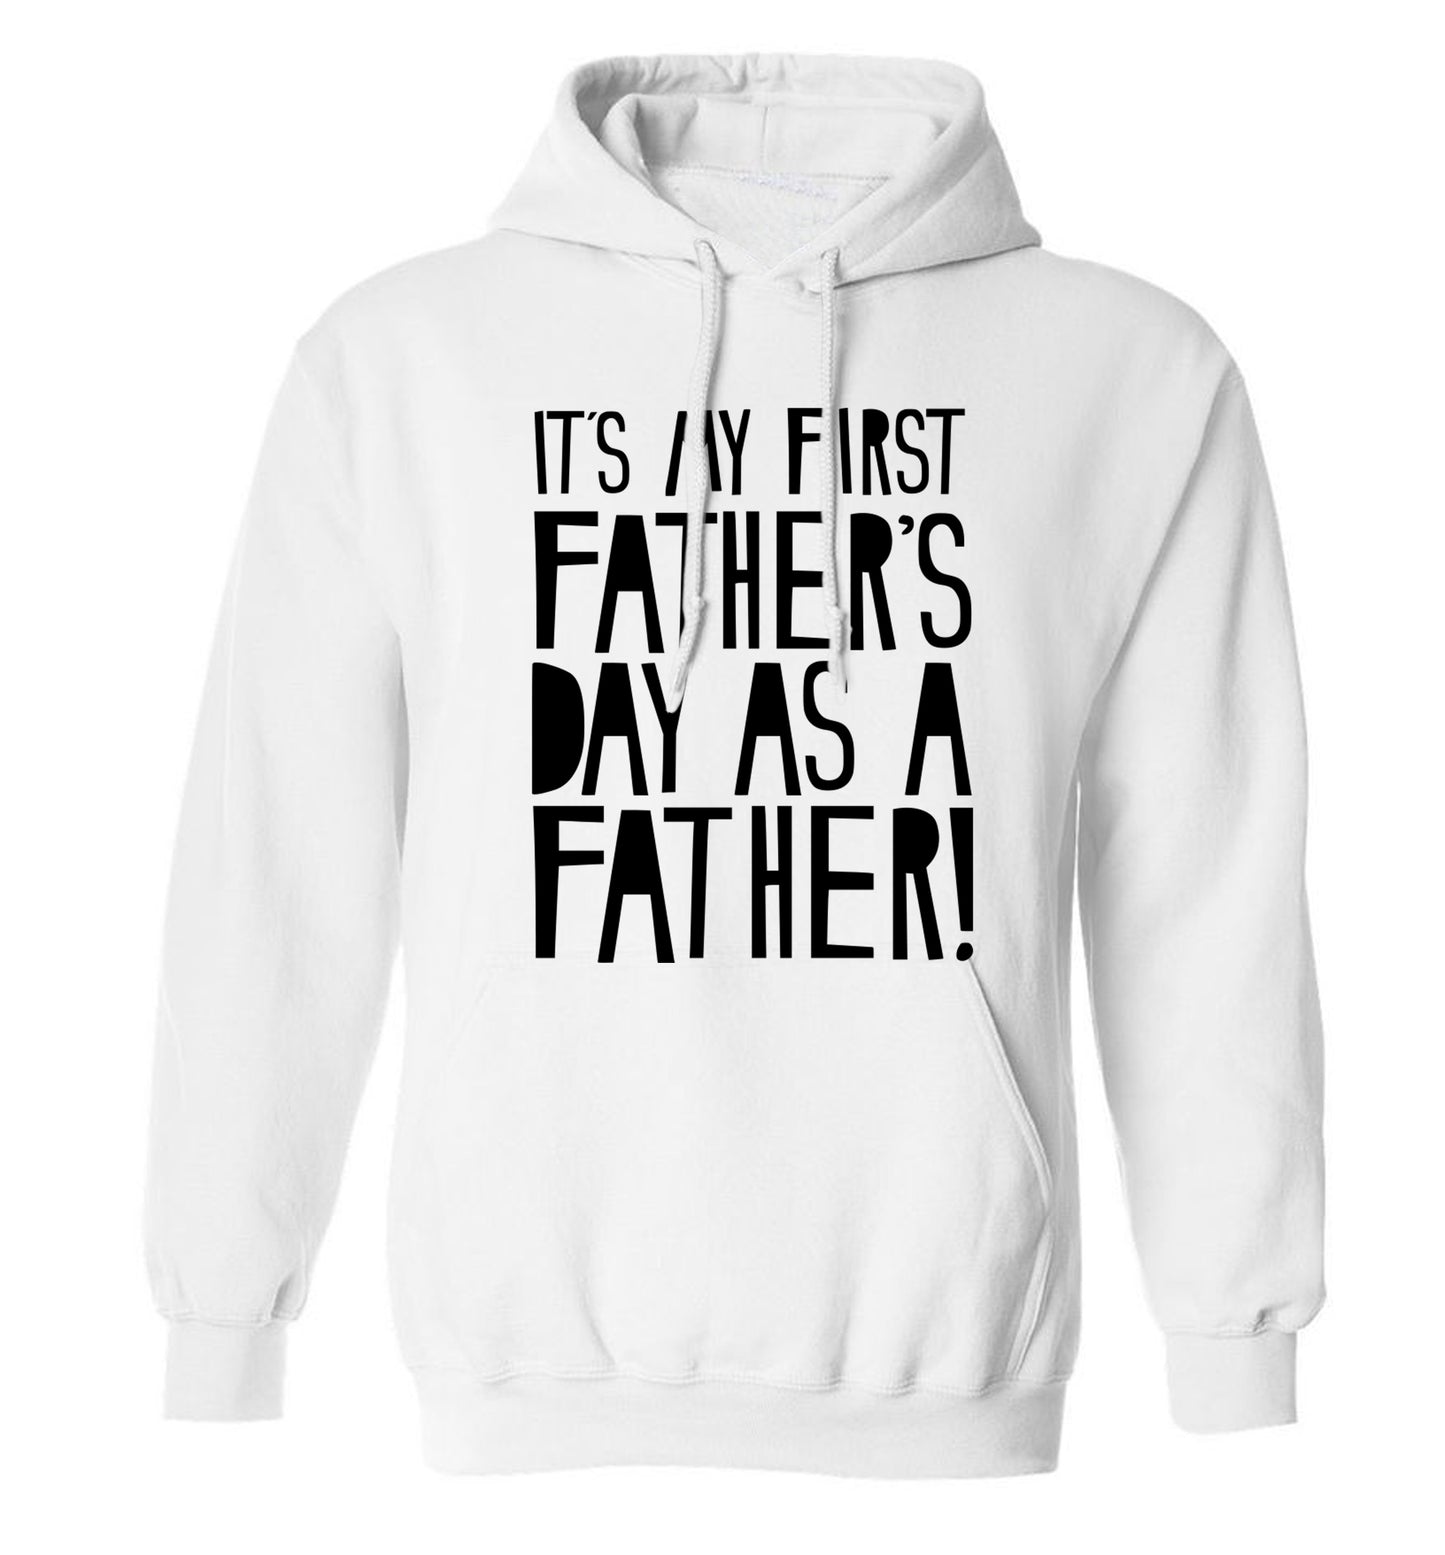 It's my first Father's Day as a father! adults unisex white hoodie 2XL